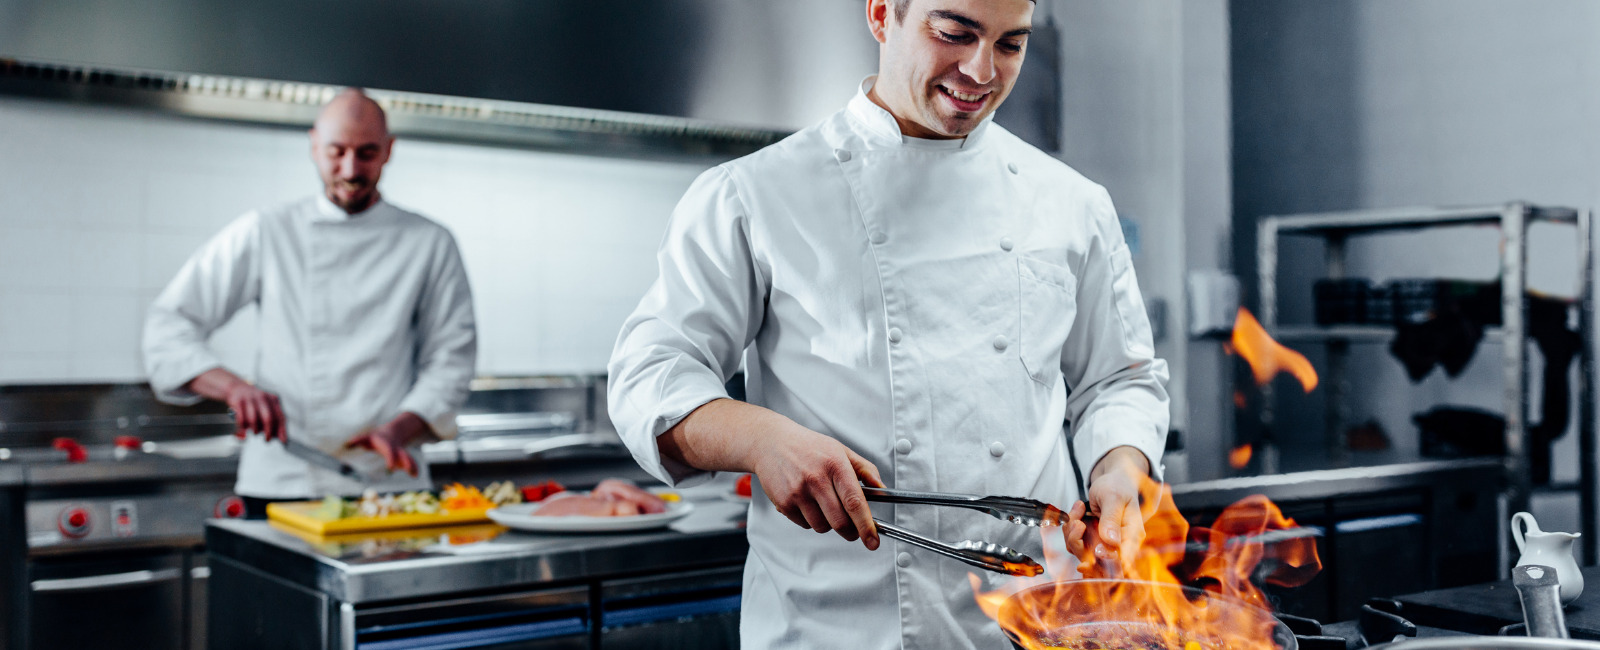 Fire Protection for Commercial Kitchens